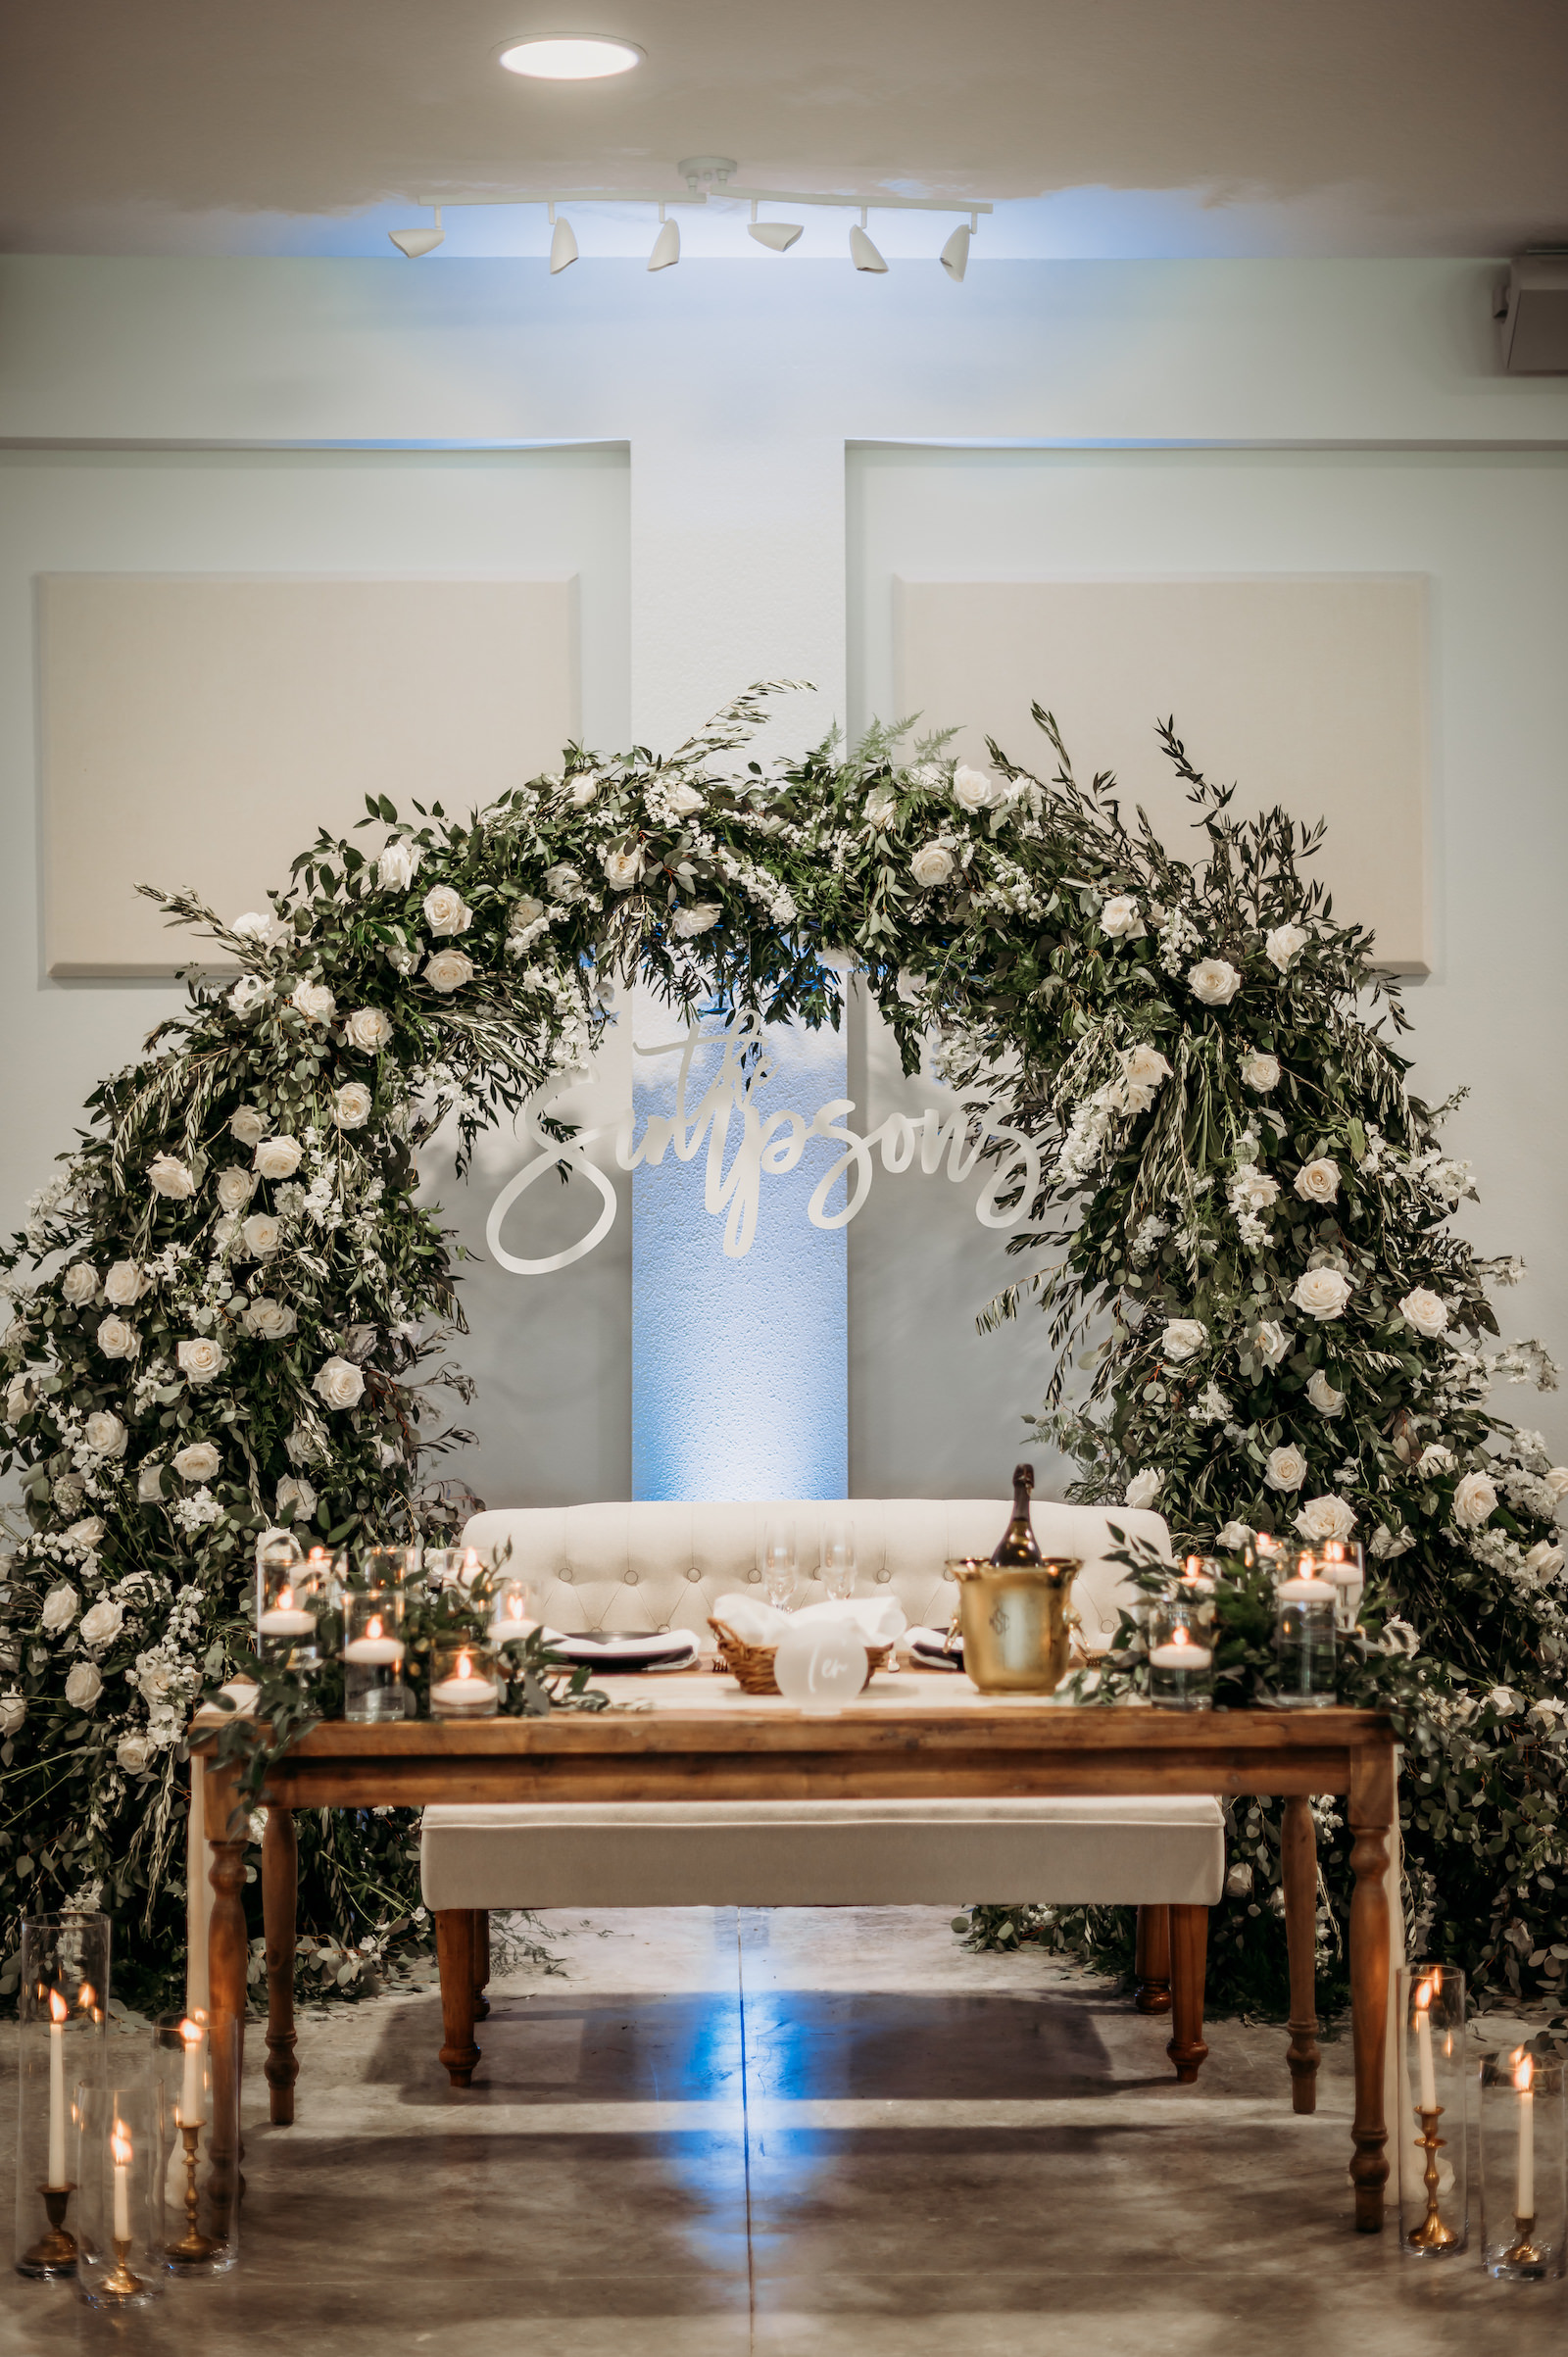 Classic Wedding Reception Decor, Long Wooden Sweetheart Table, Ivory Tufted Loveseat, Lush White Roses and Greenery Floral Arch, Custom Neon Sign